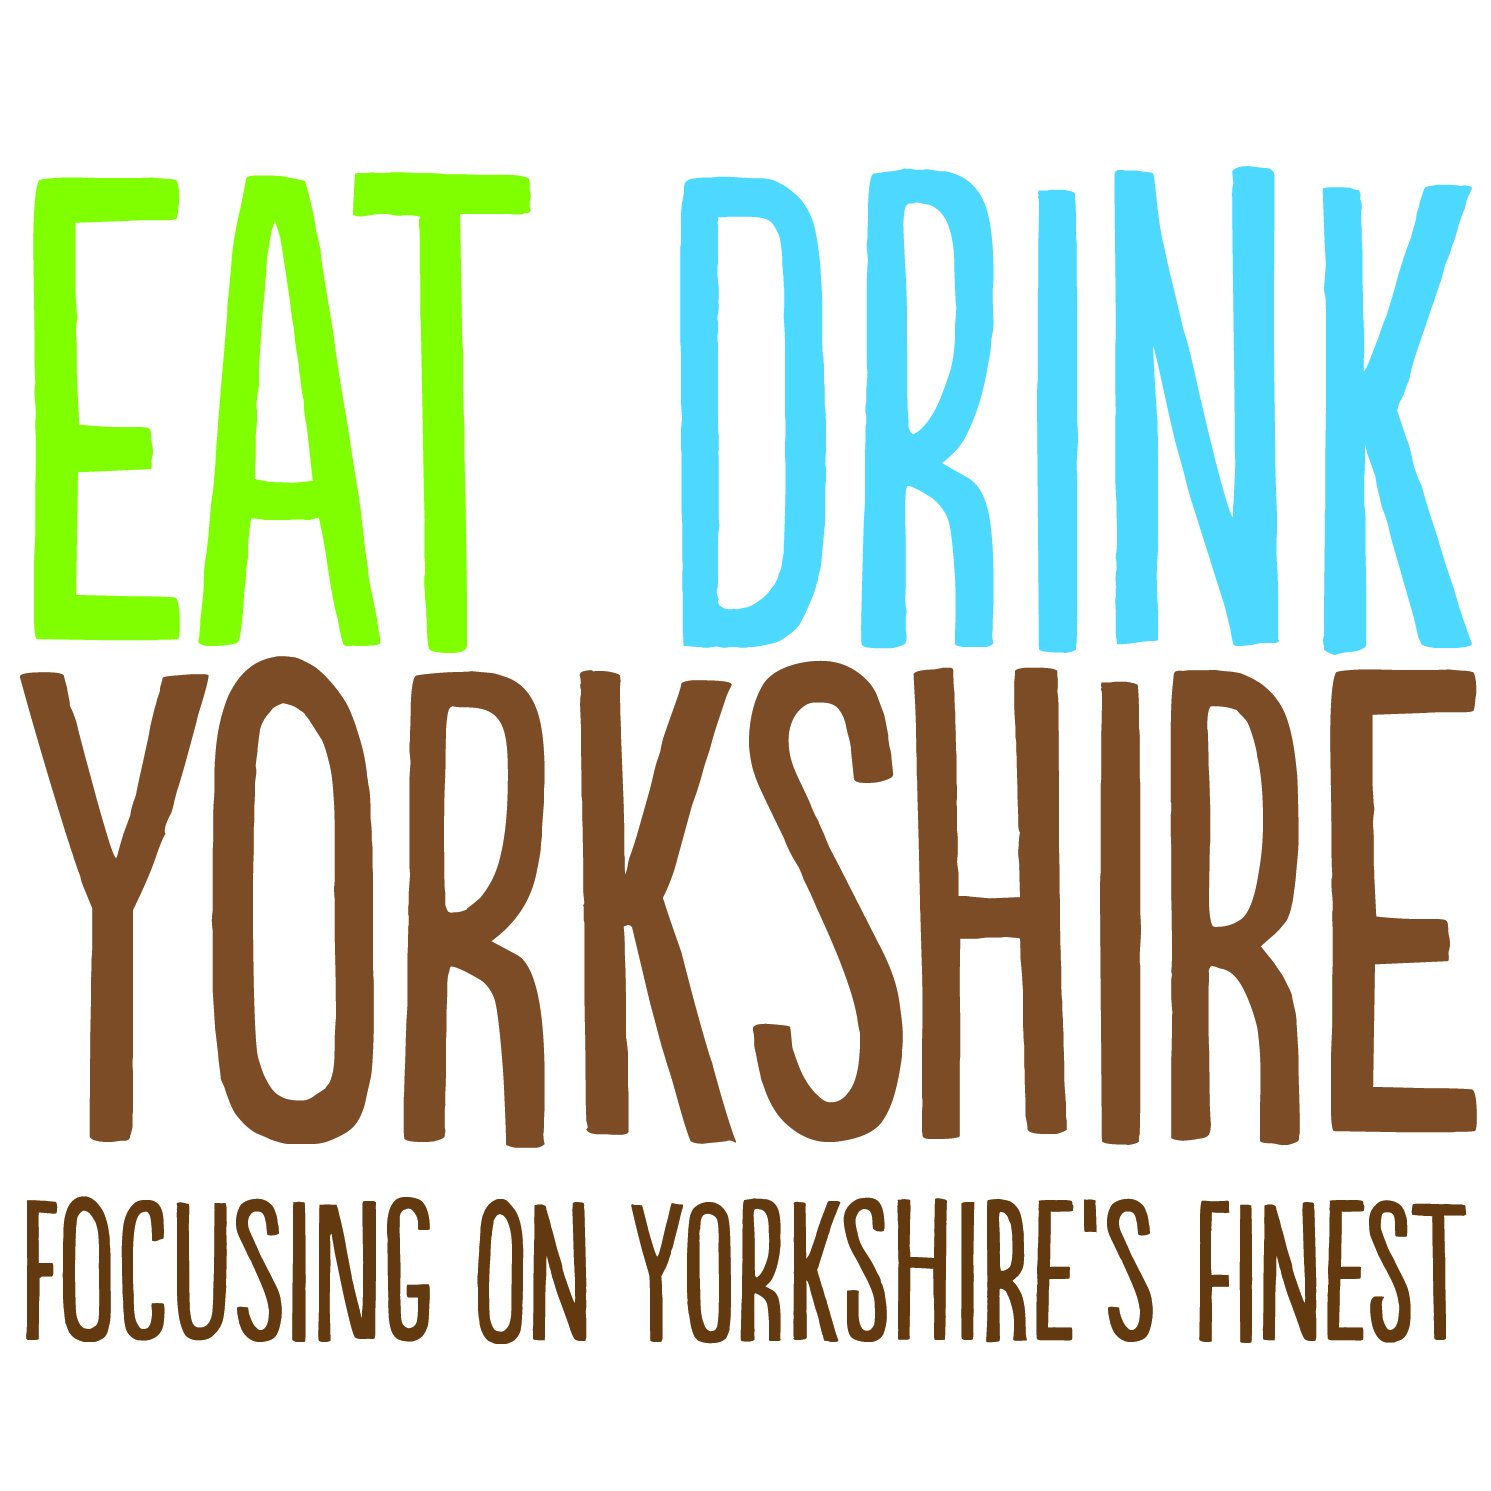 Focusing on the finest food and drink #Yorkshire has to offer at https://t.co/4hHlN9QQs5